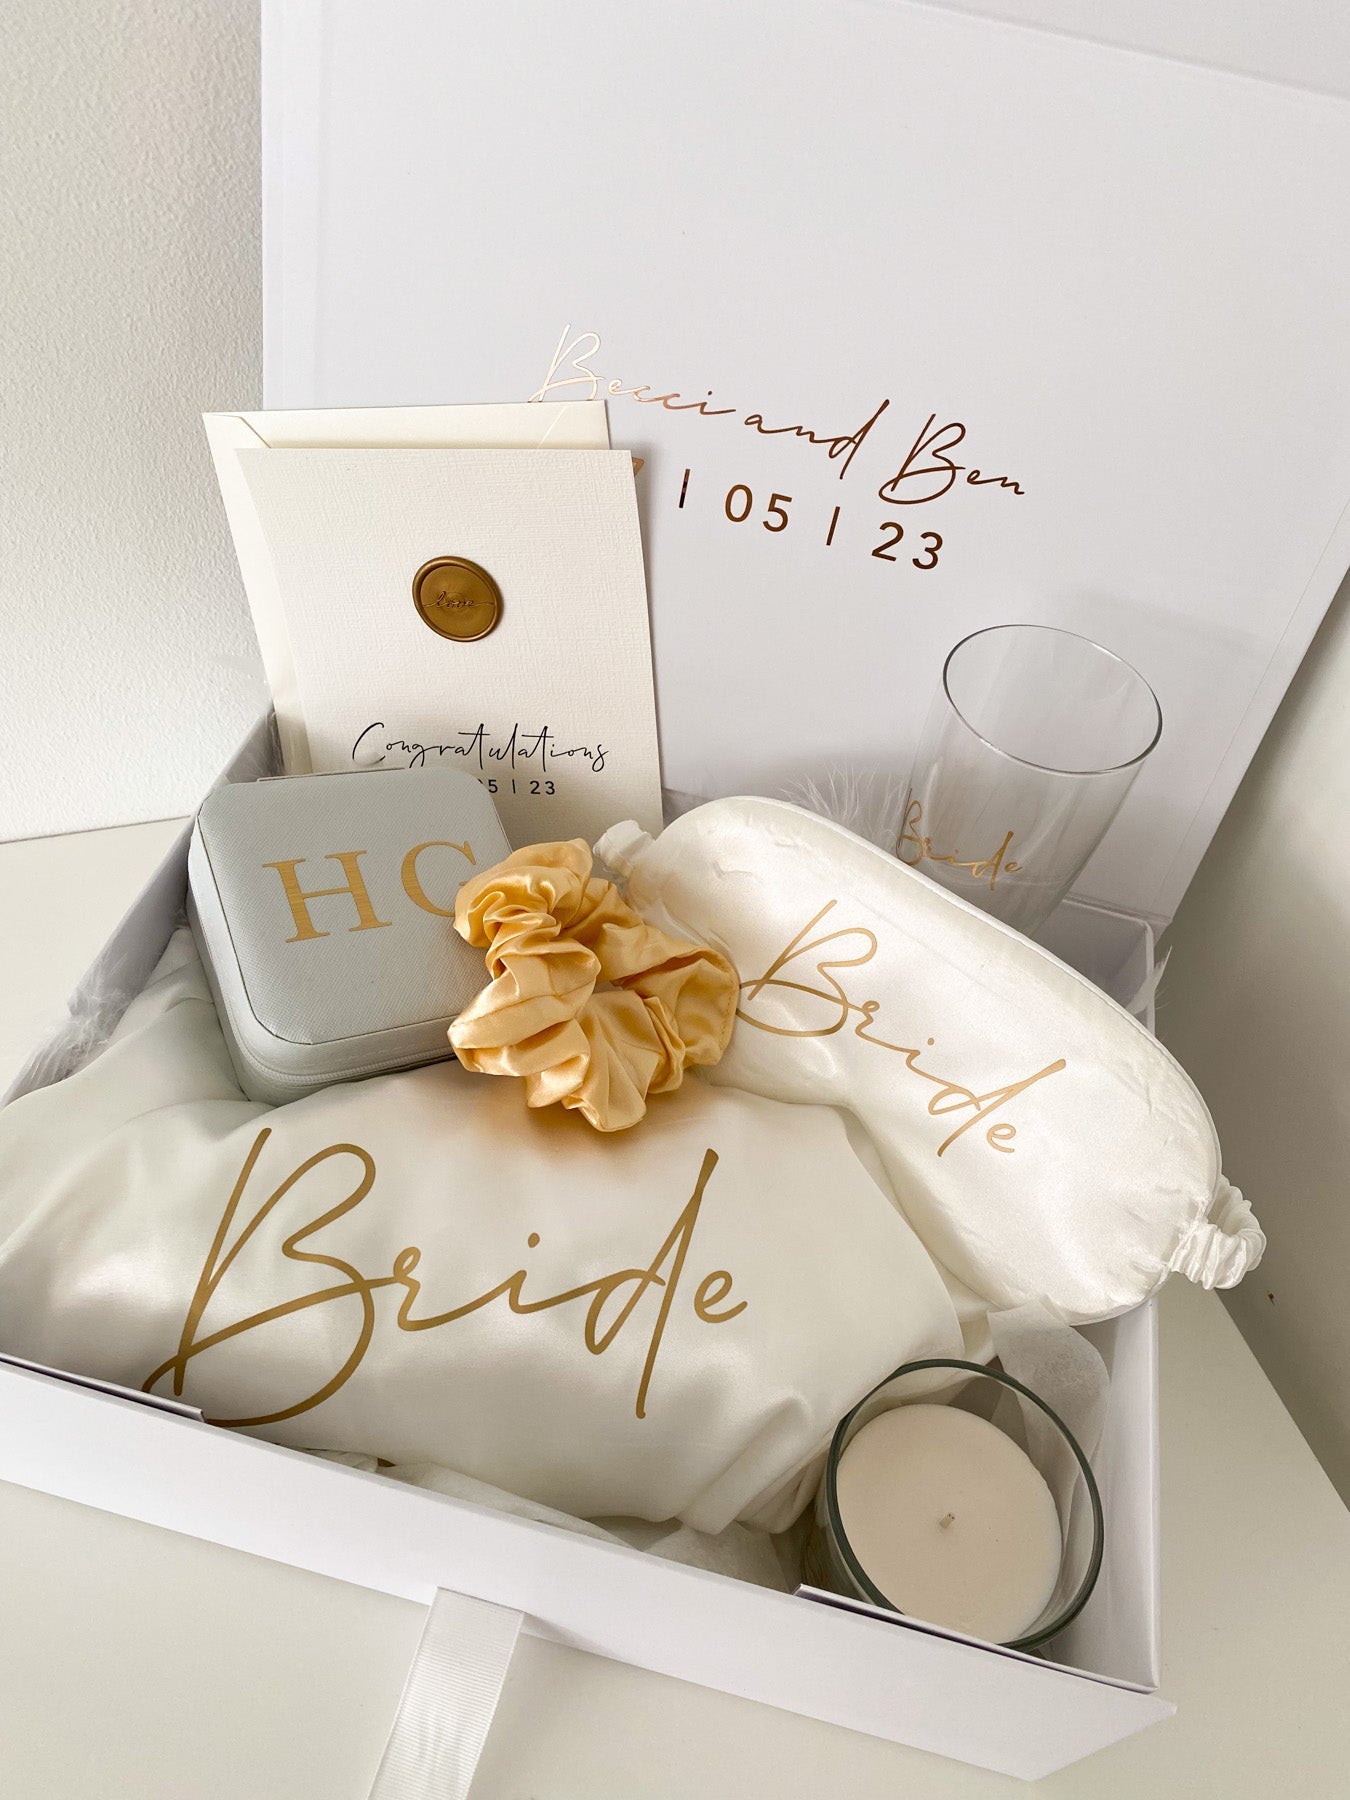 Wedding Day Gifts for Brides: 35 Gifts She'll Love - hitched.co.uk